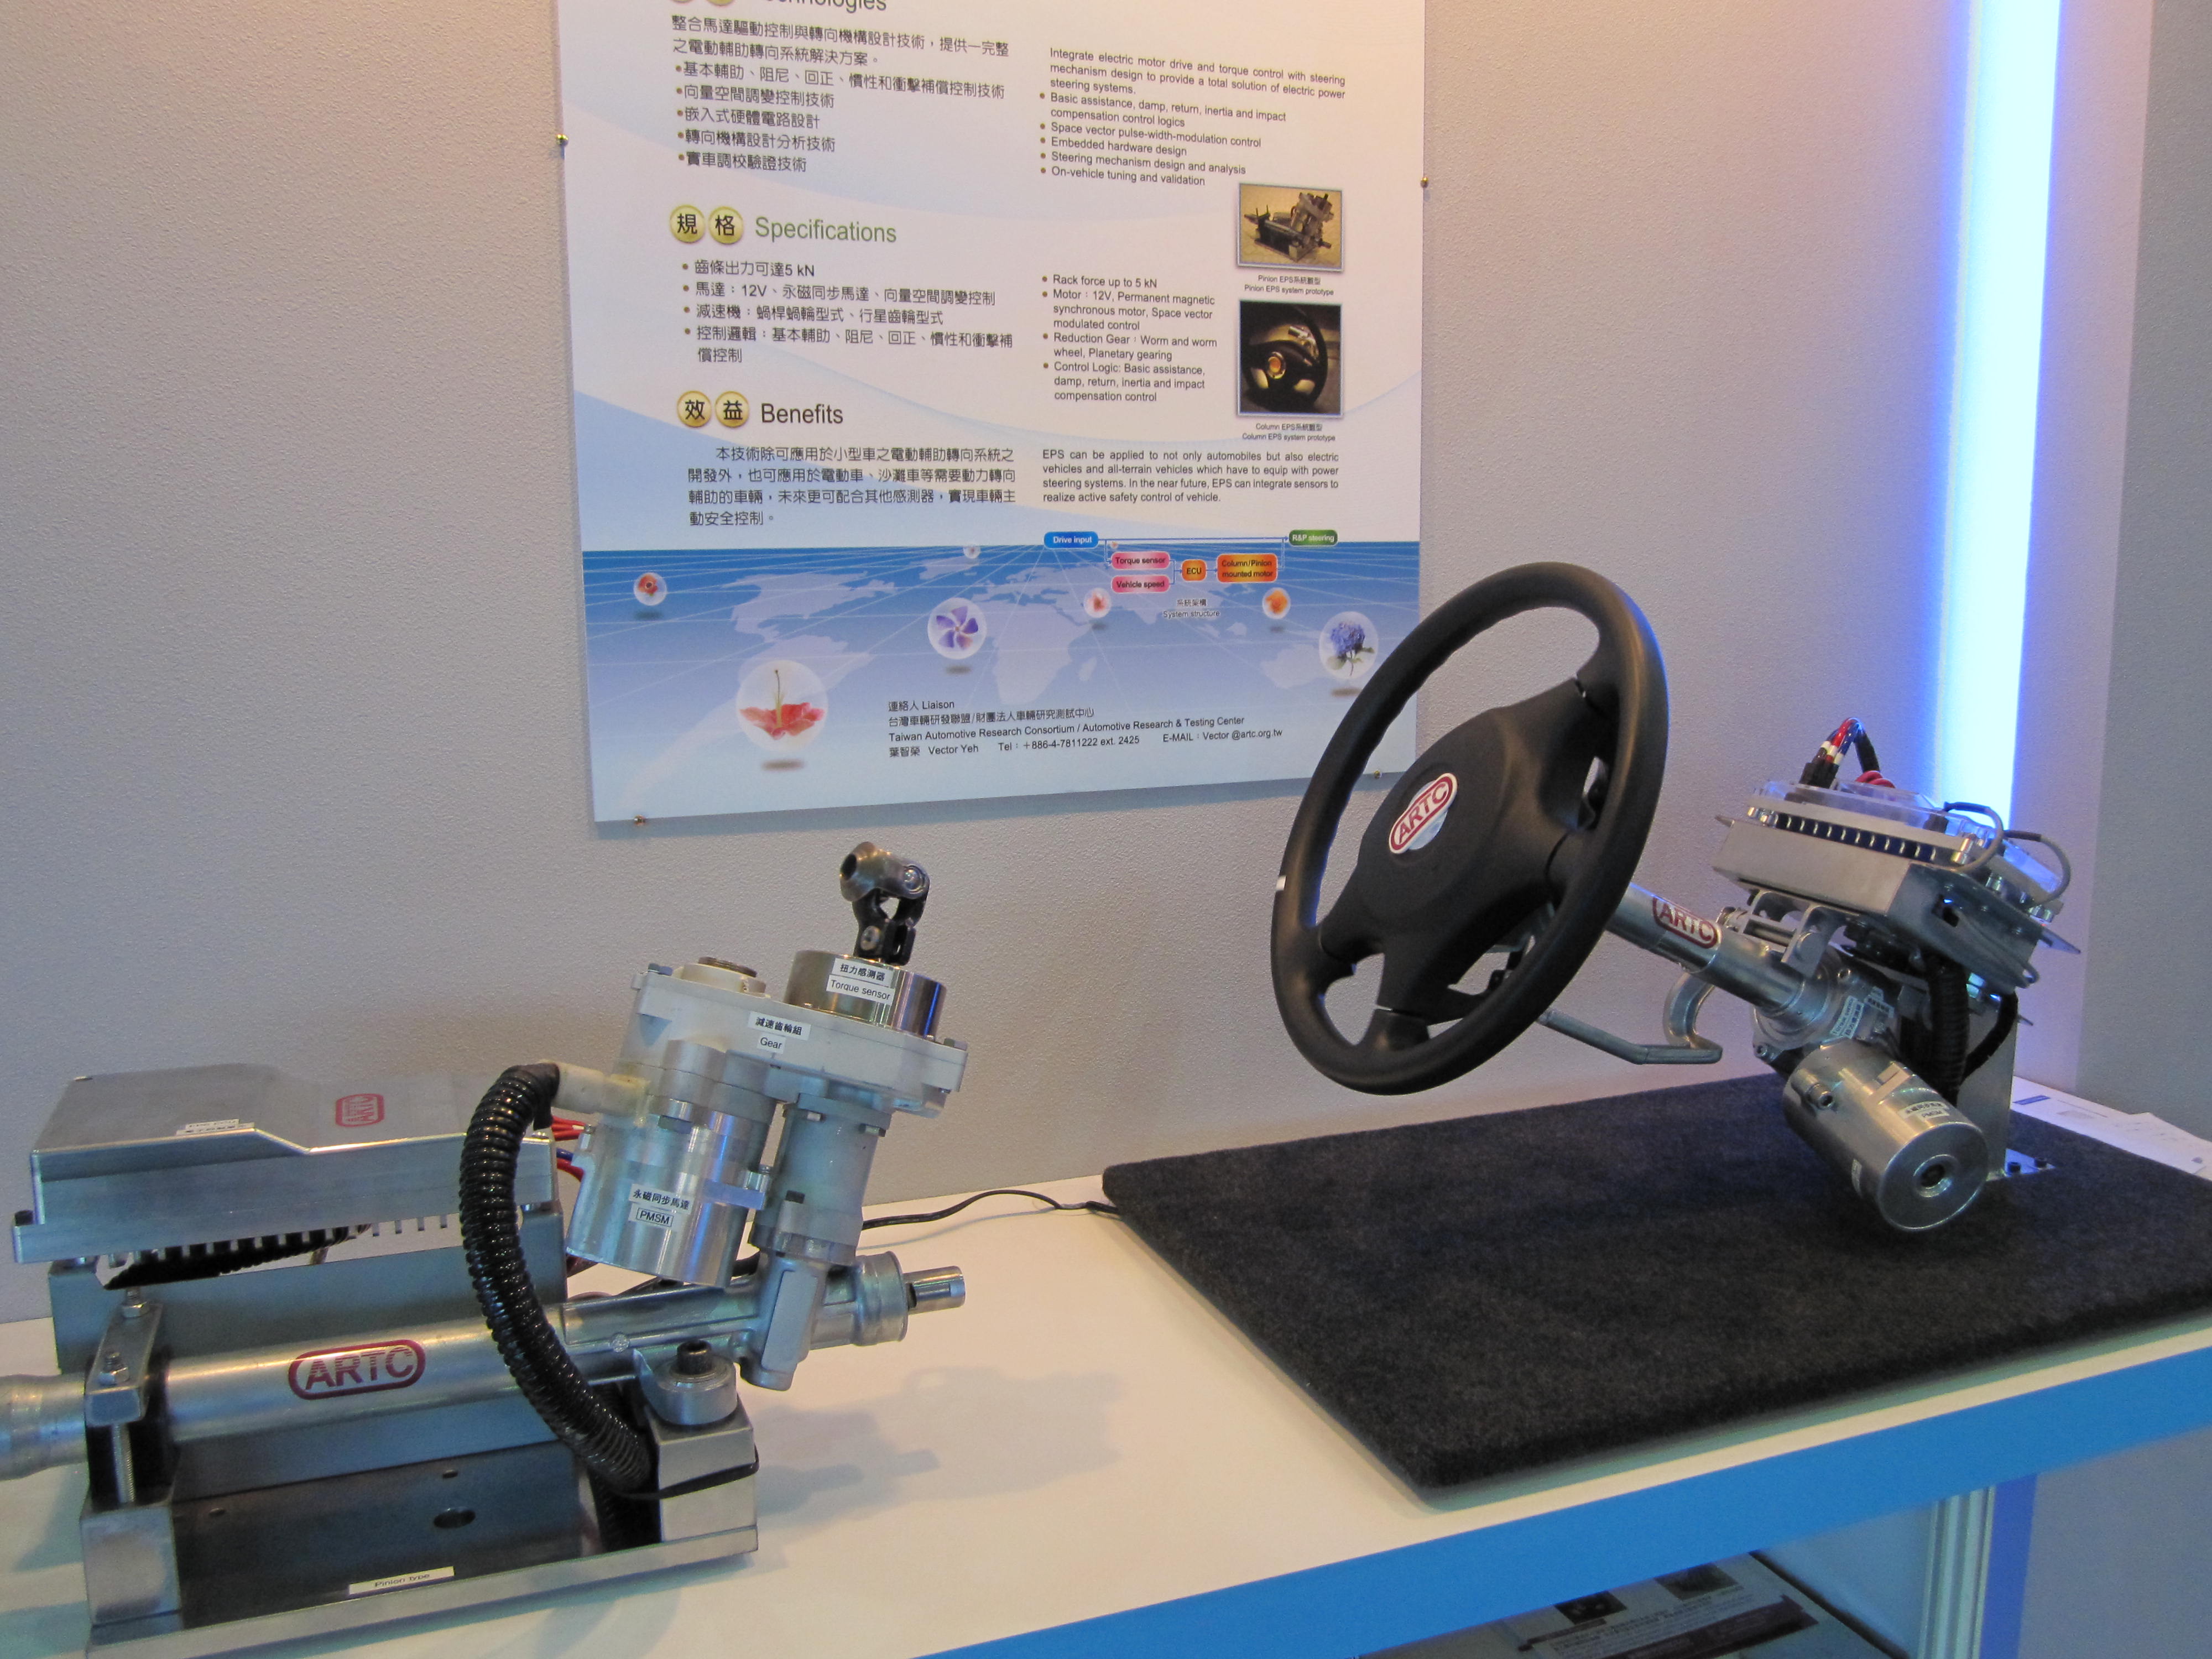 The Electric Power Steering System (EPS) by ARTC.